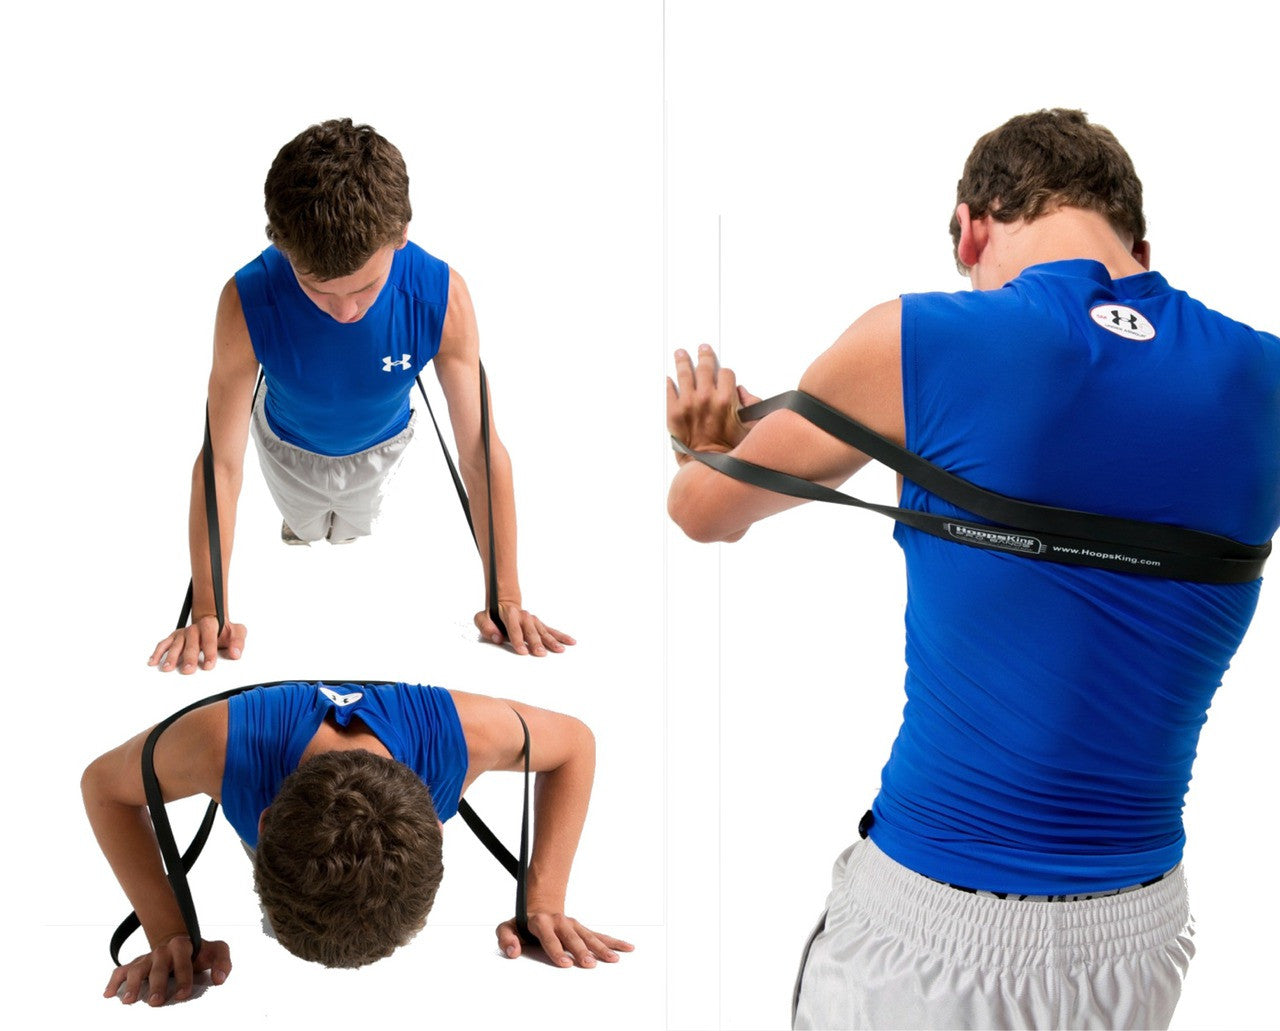 Grab Classy Push Up Board For Upper Body - Complete Pushup Board